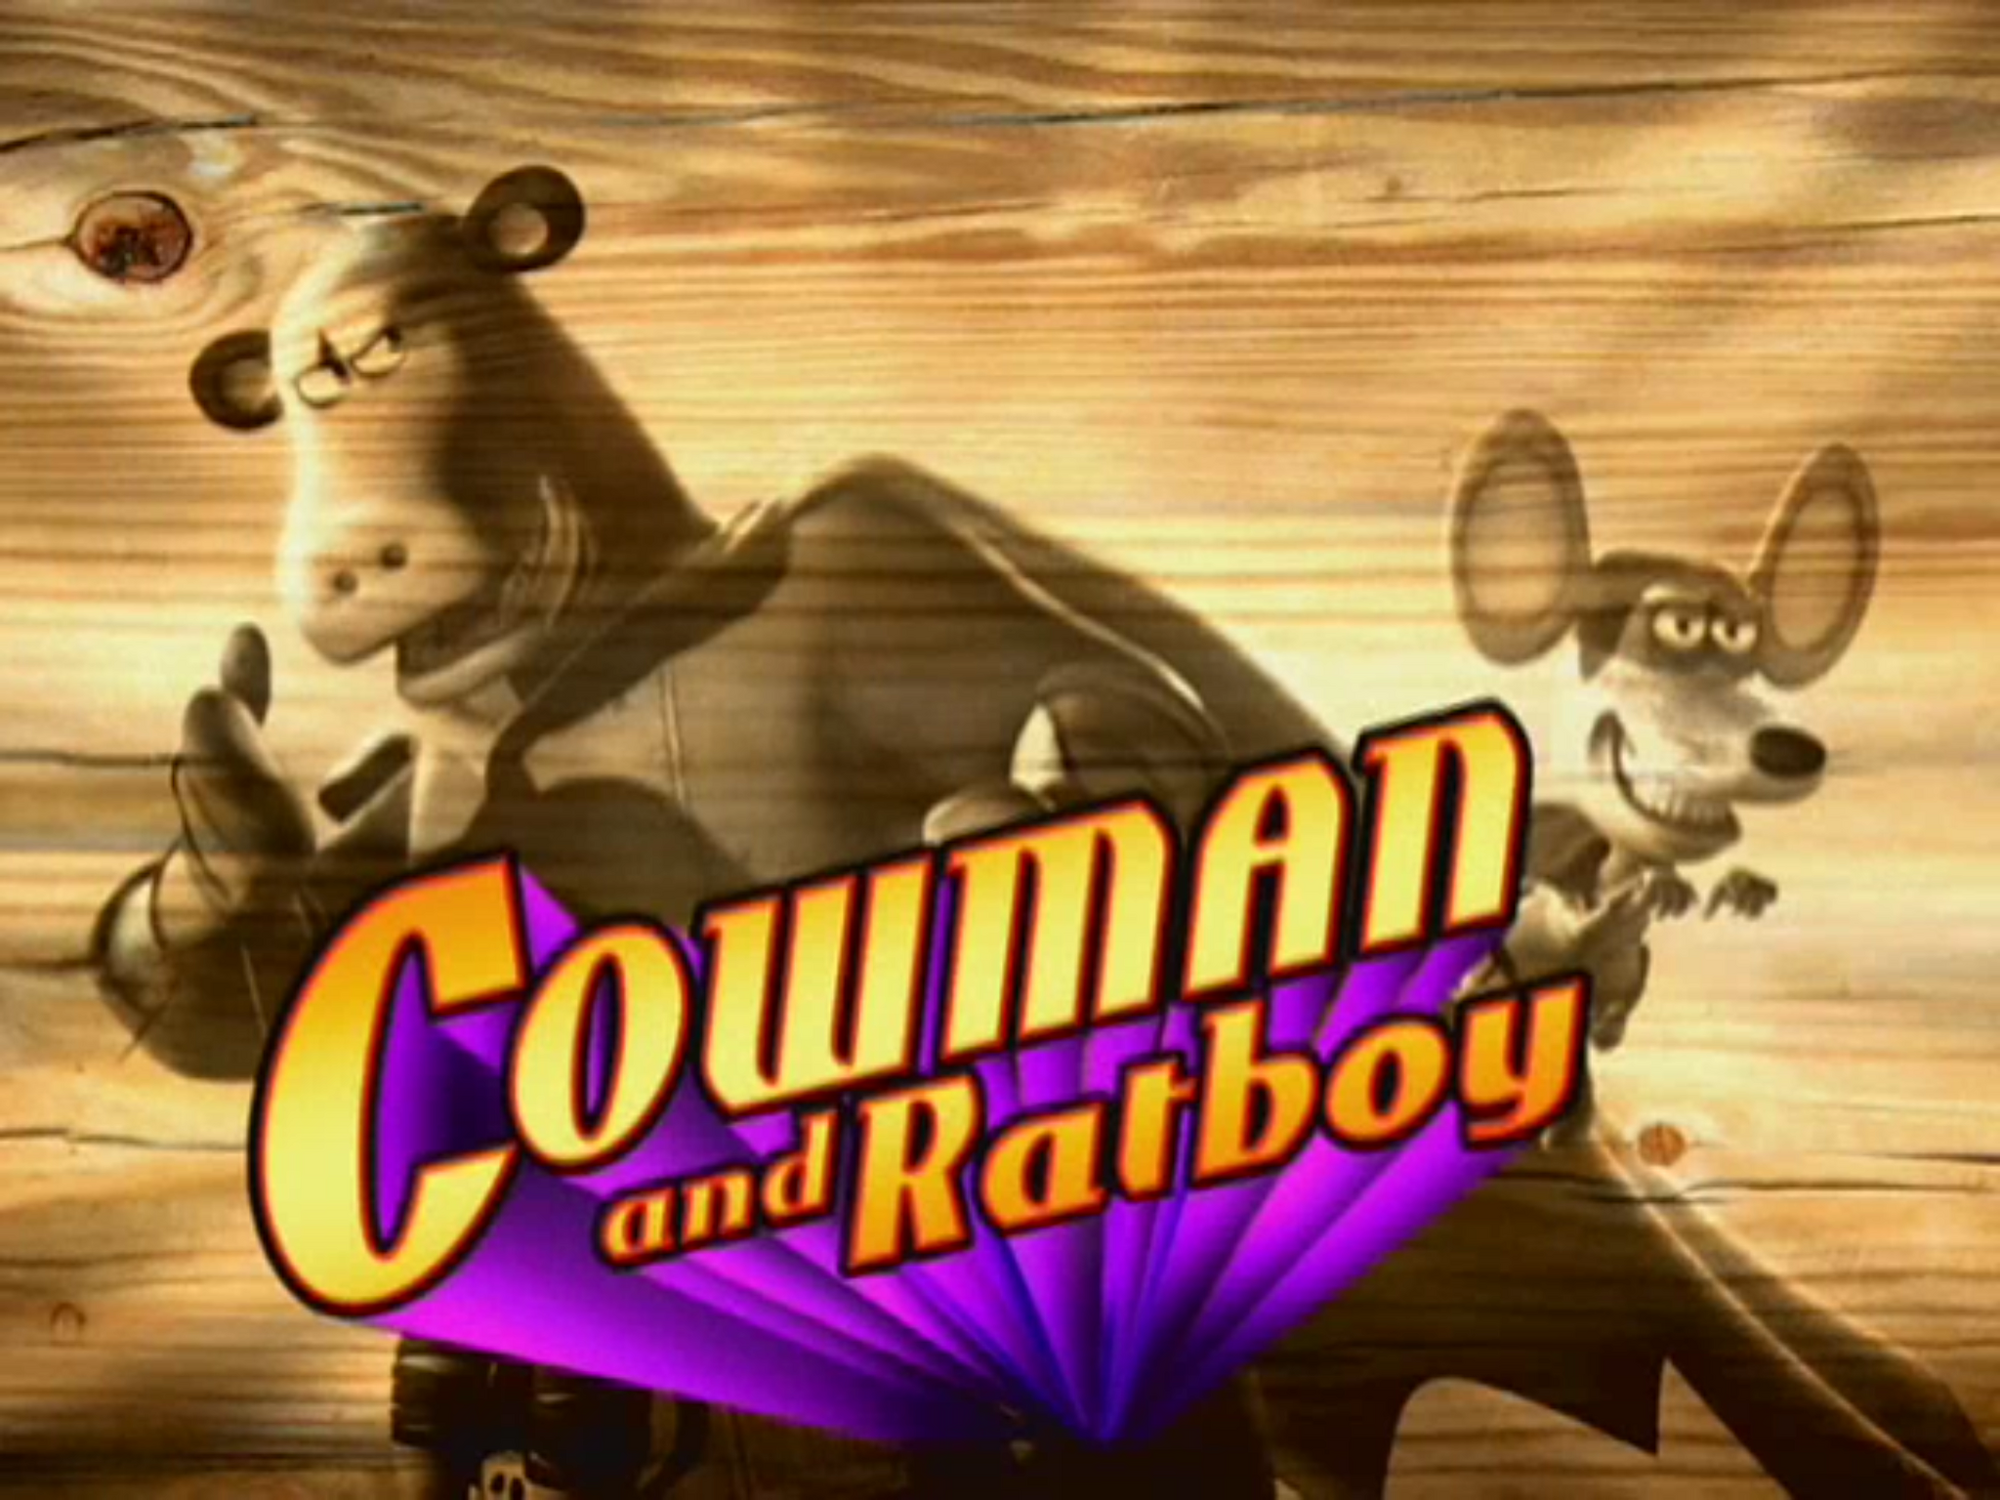 Cowman and Ratboy/Transcript | Pooh's Adventures Wiki | FANDOM powered by Wikia2000 x 1500